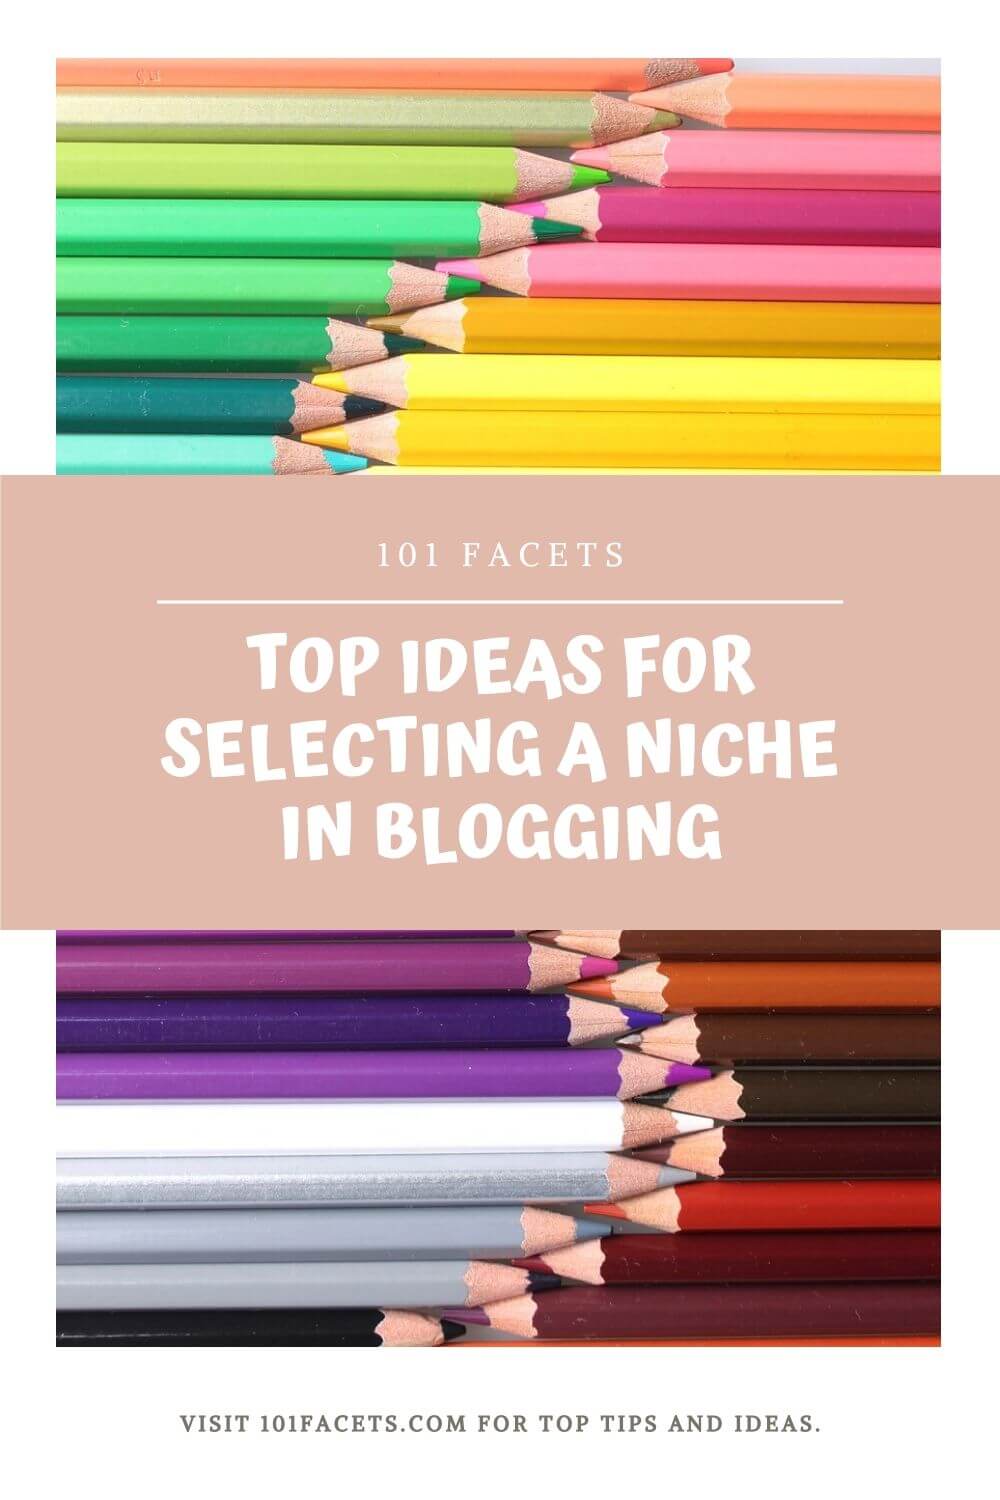 Top Ideas for Selecting a Niche in Blogging